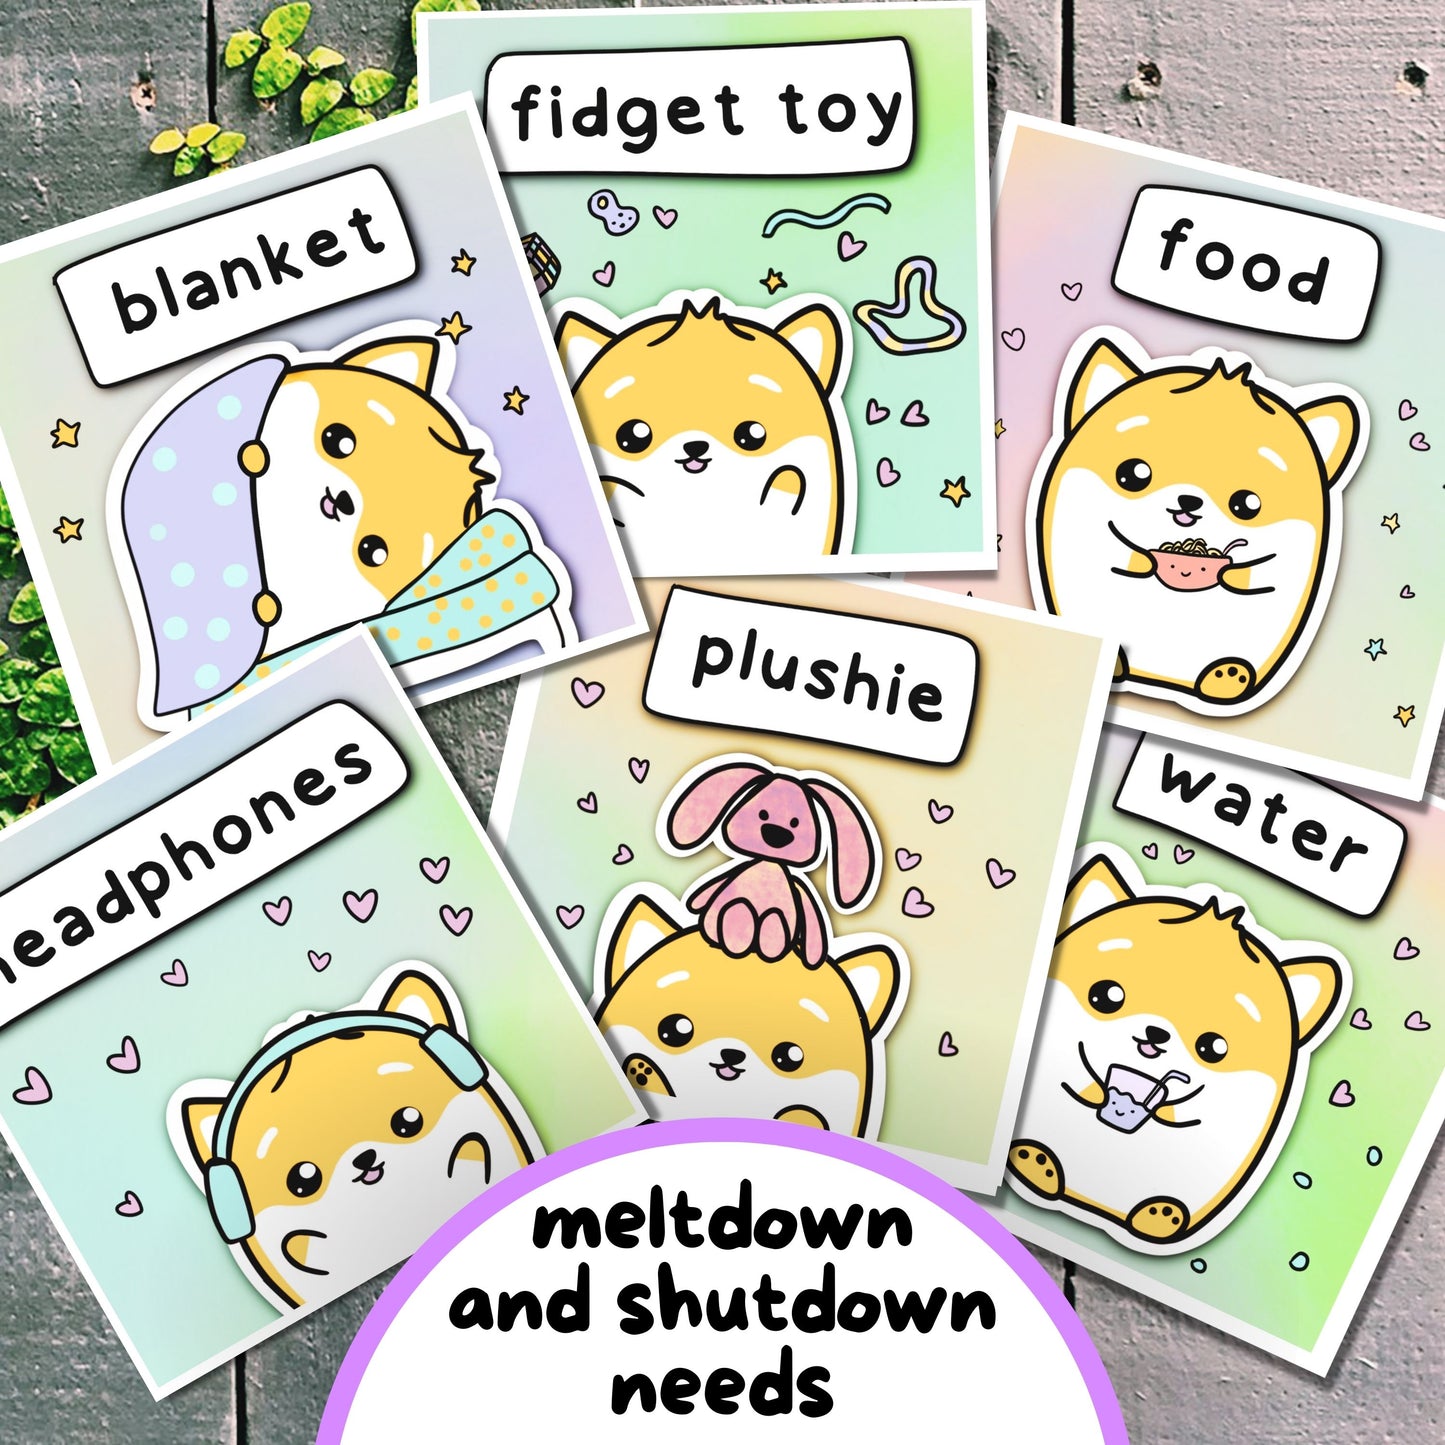 Communication Cards & Affirmation Cards (Digital) ft. Kifli, the Dog - Personal Use, by lil penguin studios, Non Verbal Communication Cards, Meltdown/ Shutdown Prevention/ Recovery Aid, Self-Regulation Tool, Autistic Burnout Help, Dog-Design Print